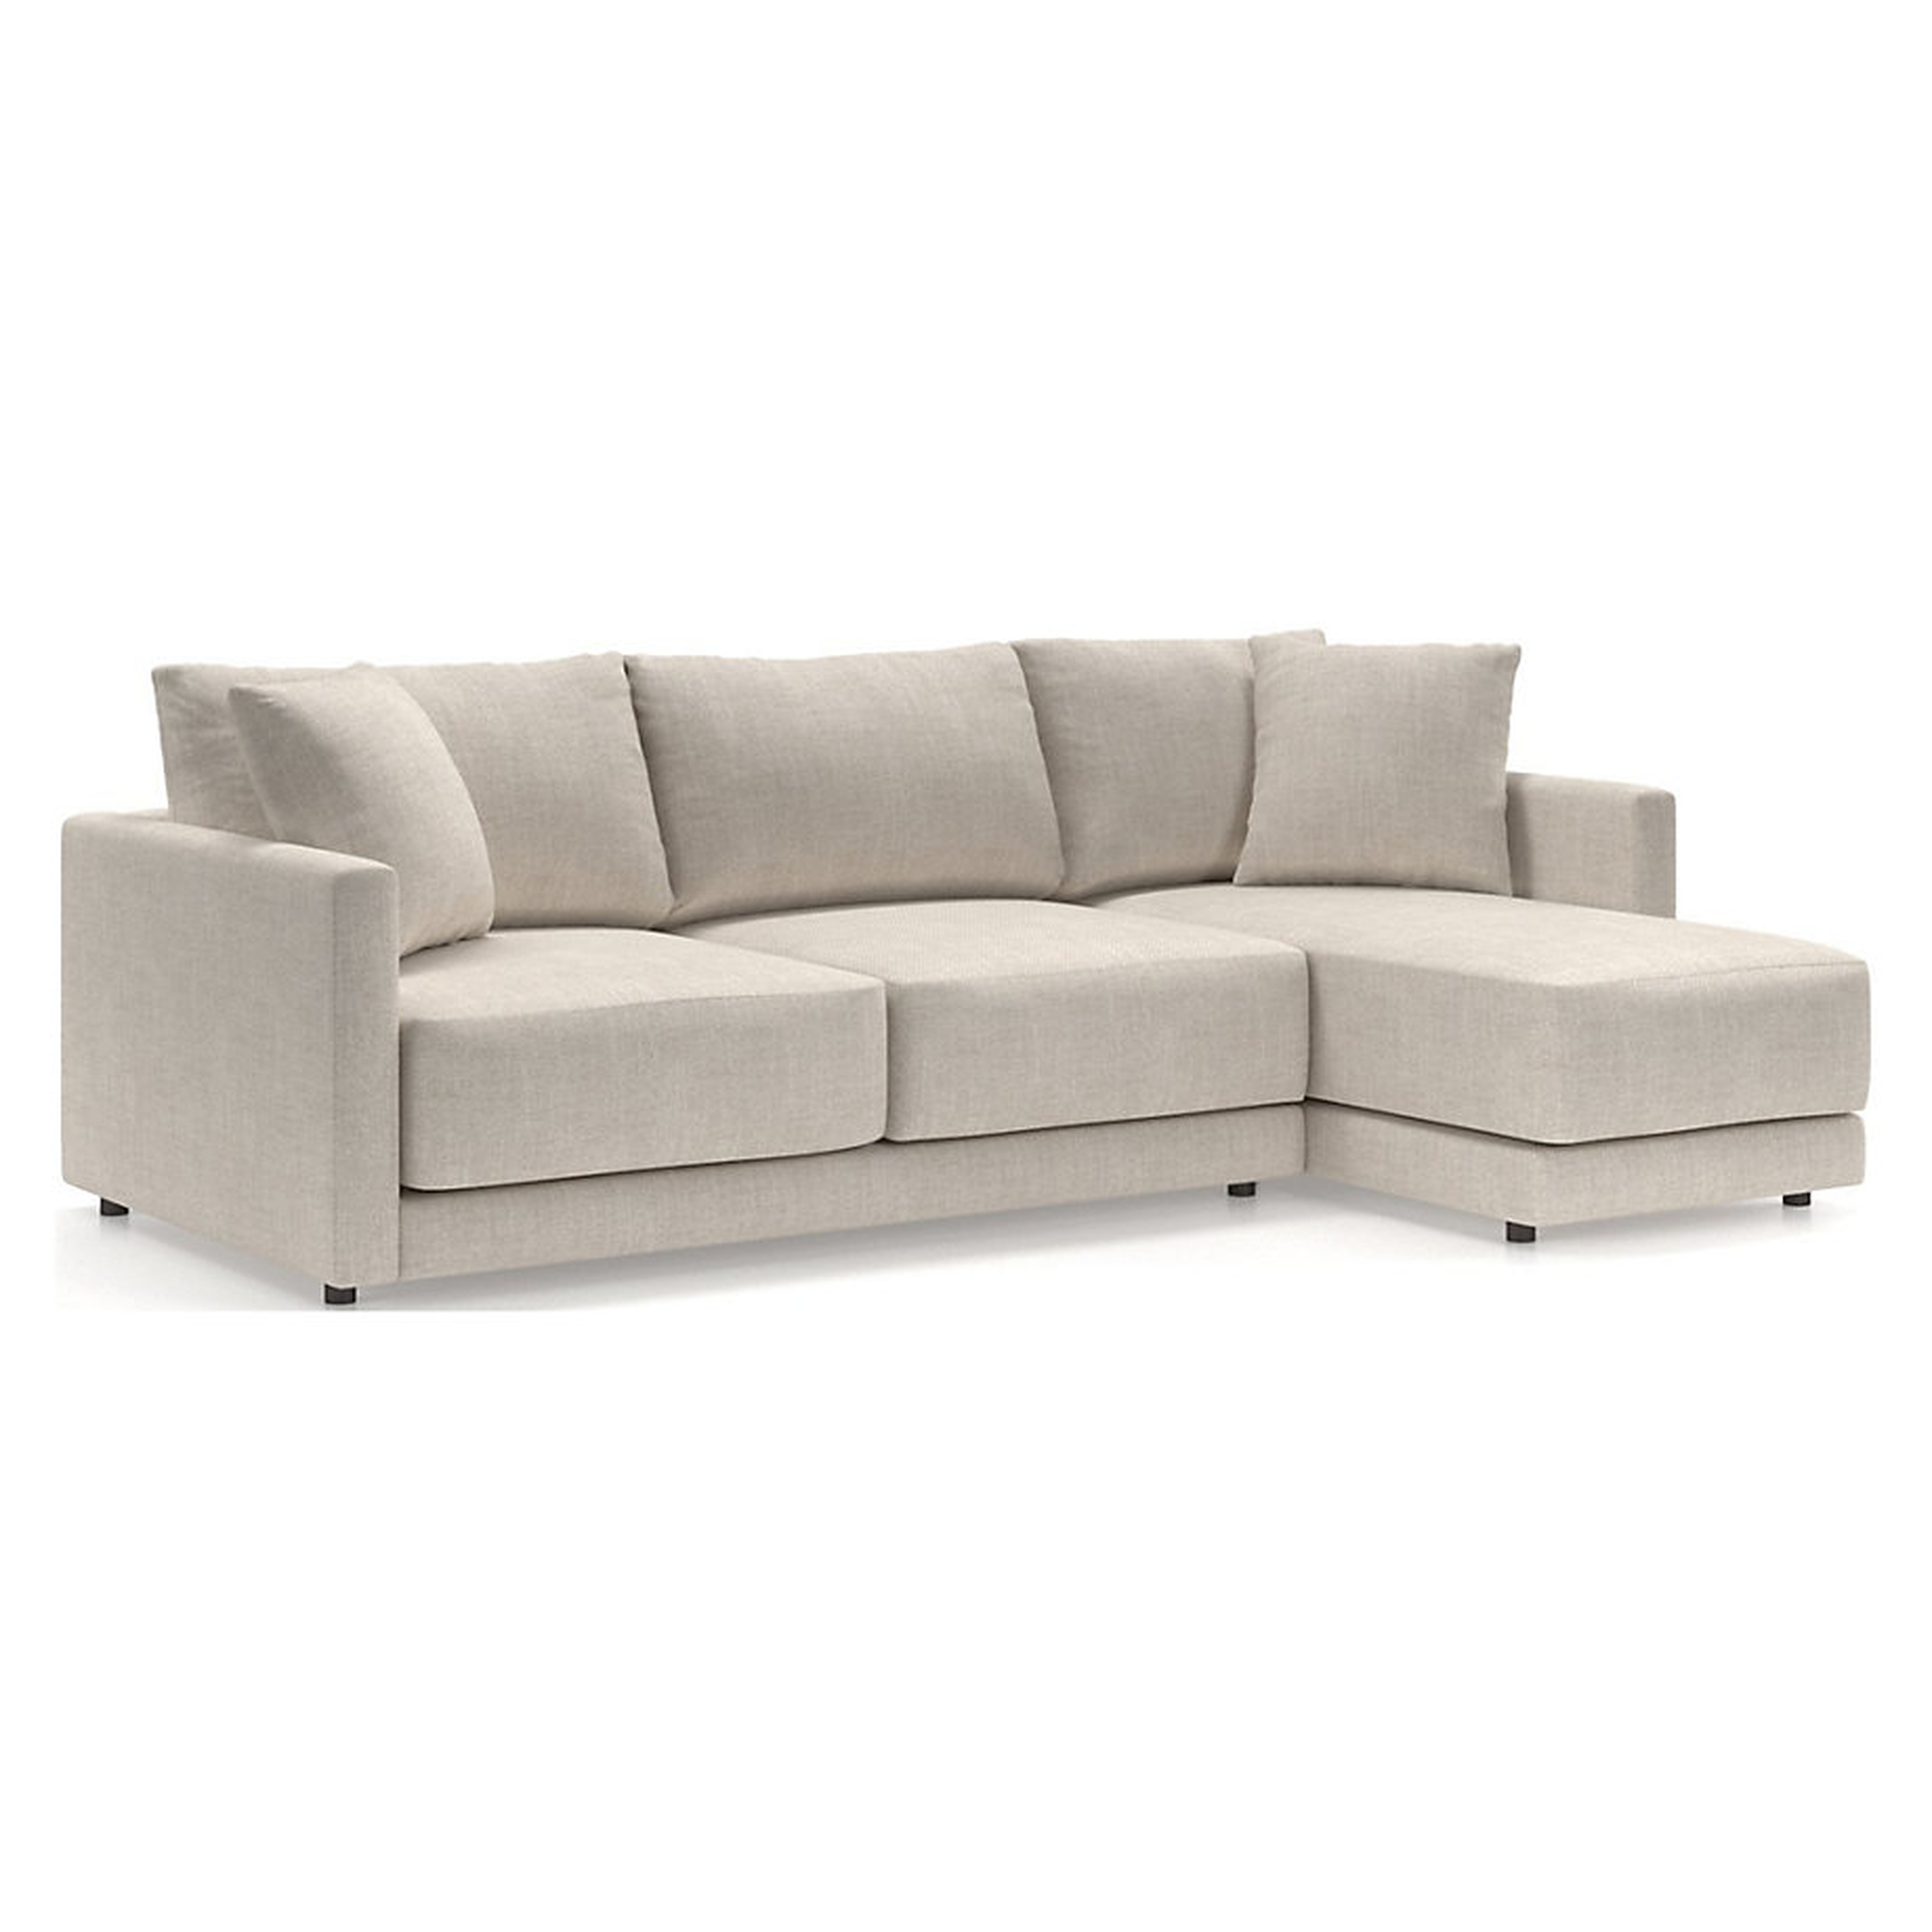 Gather 2-Piece Sectional with Right-Arm Chaise - Crate and Barrel